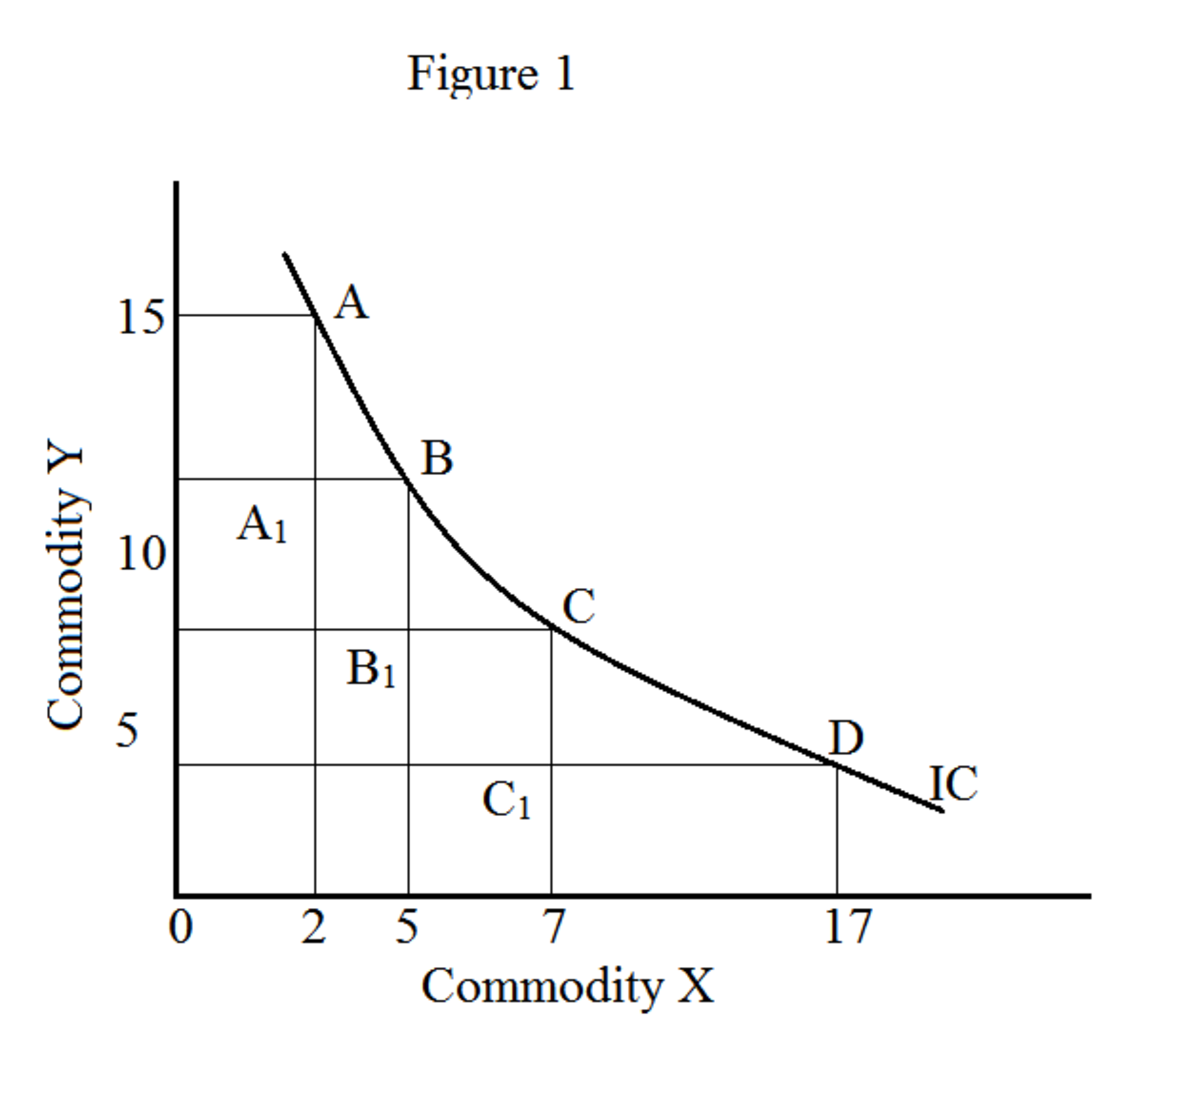 indifference curve analysis pdf